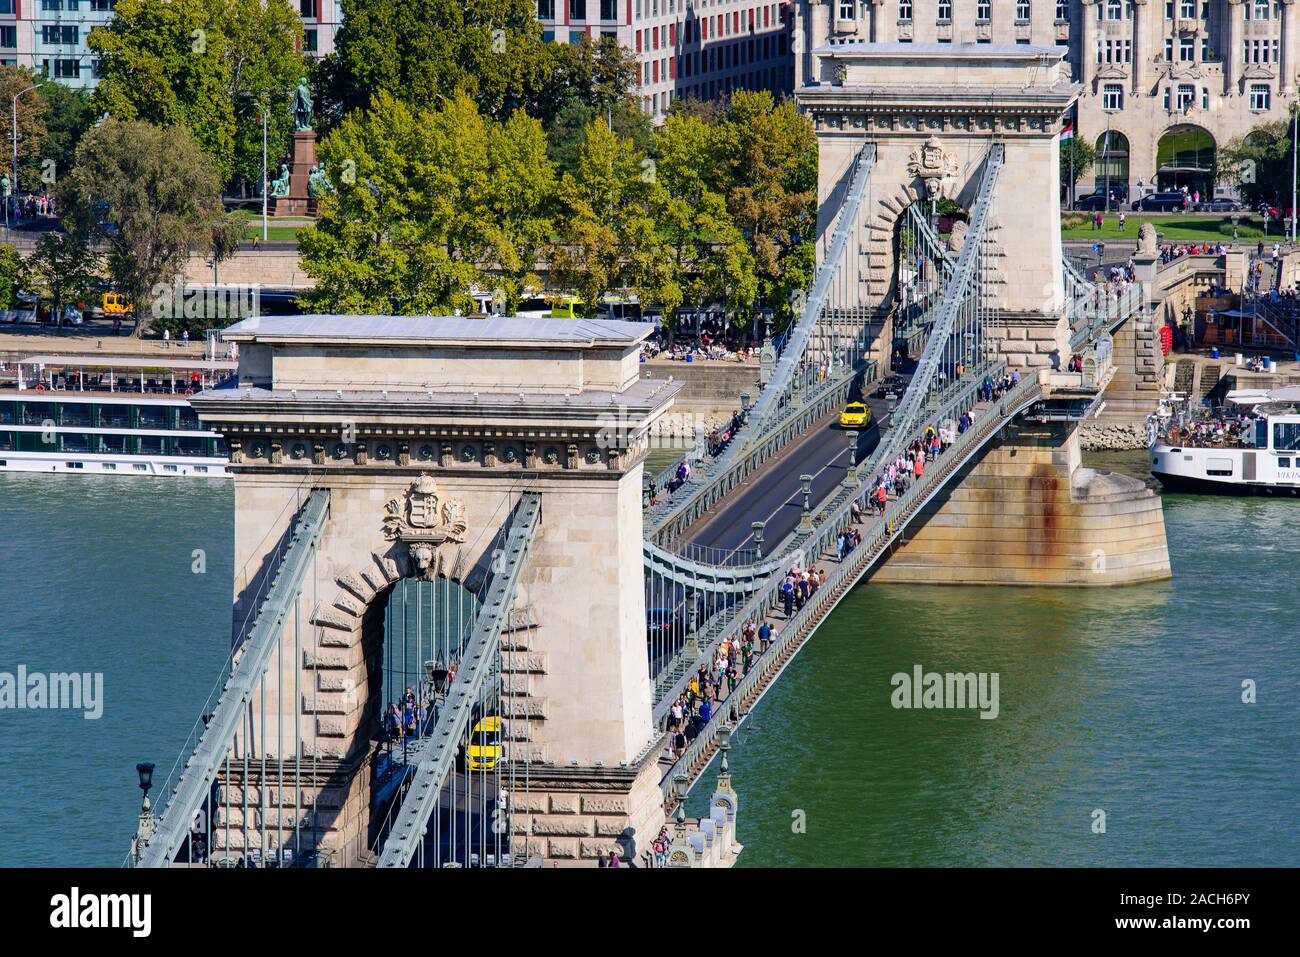 Aerial view of Széchenyi Chain Bridge across the River Danube connecting Buda and Pest, Budapest, Hungary Stock Photo